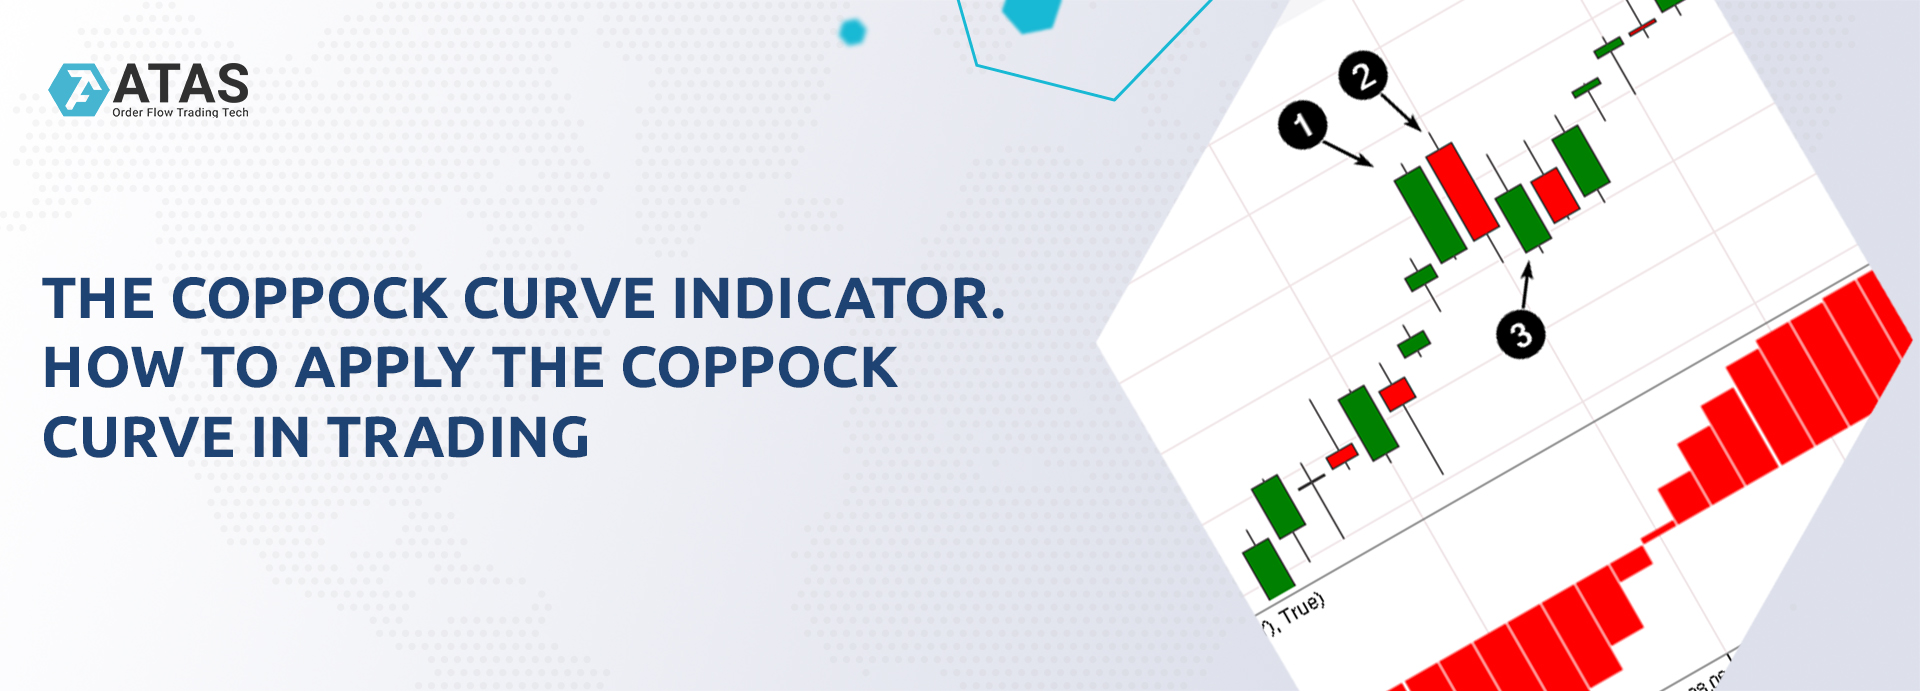 The Coppock Curve indicator. How to apply the Coppock Curve in trading